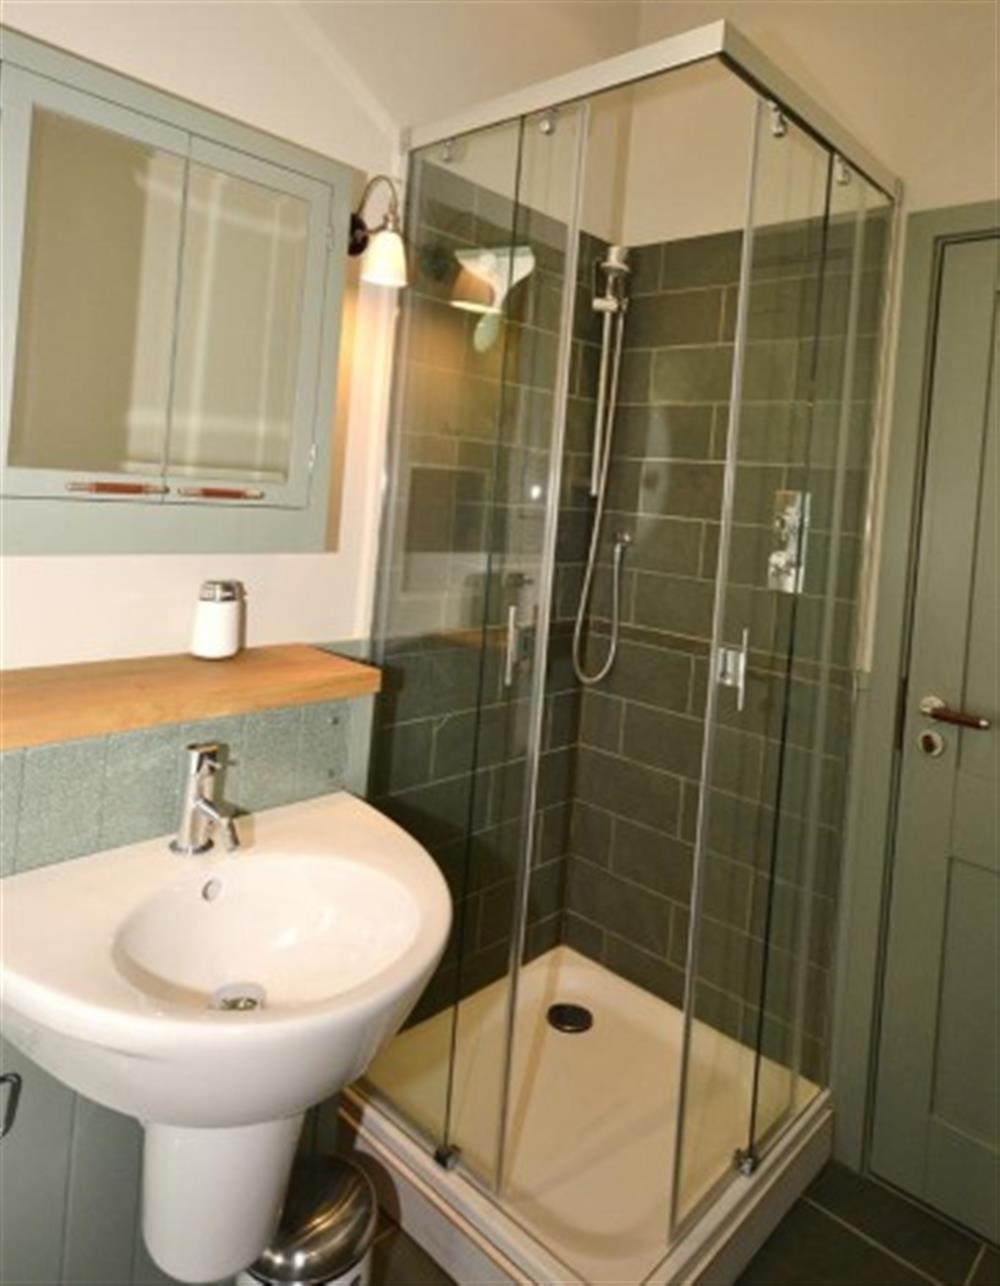 The bathroom showing the shower cubicle at 39 Talland in Talland Bay